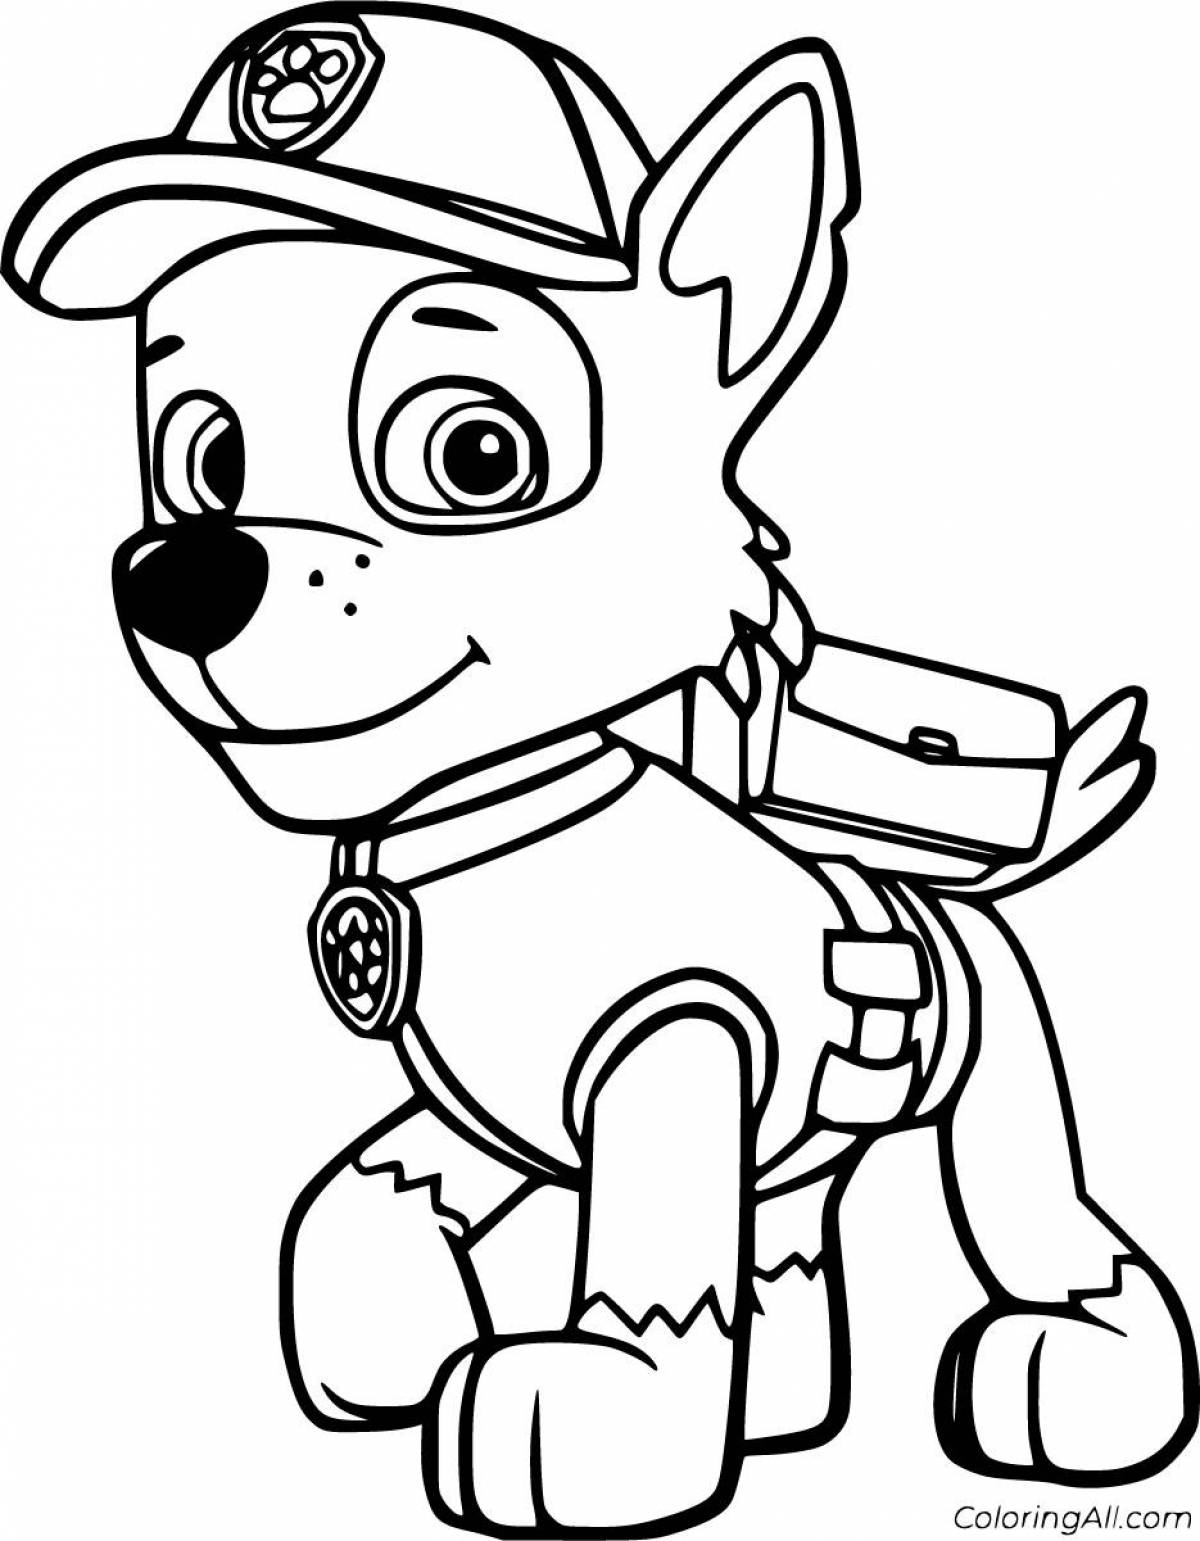 Wonderful Paw Patrol coloring book for kids 6-7 years old